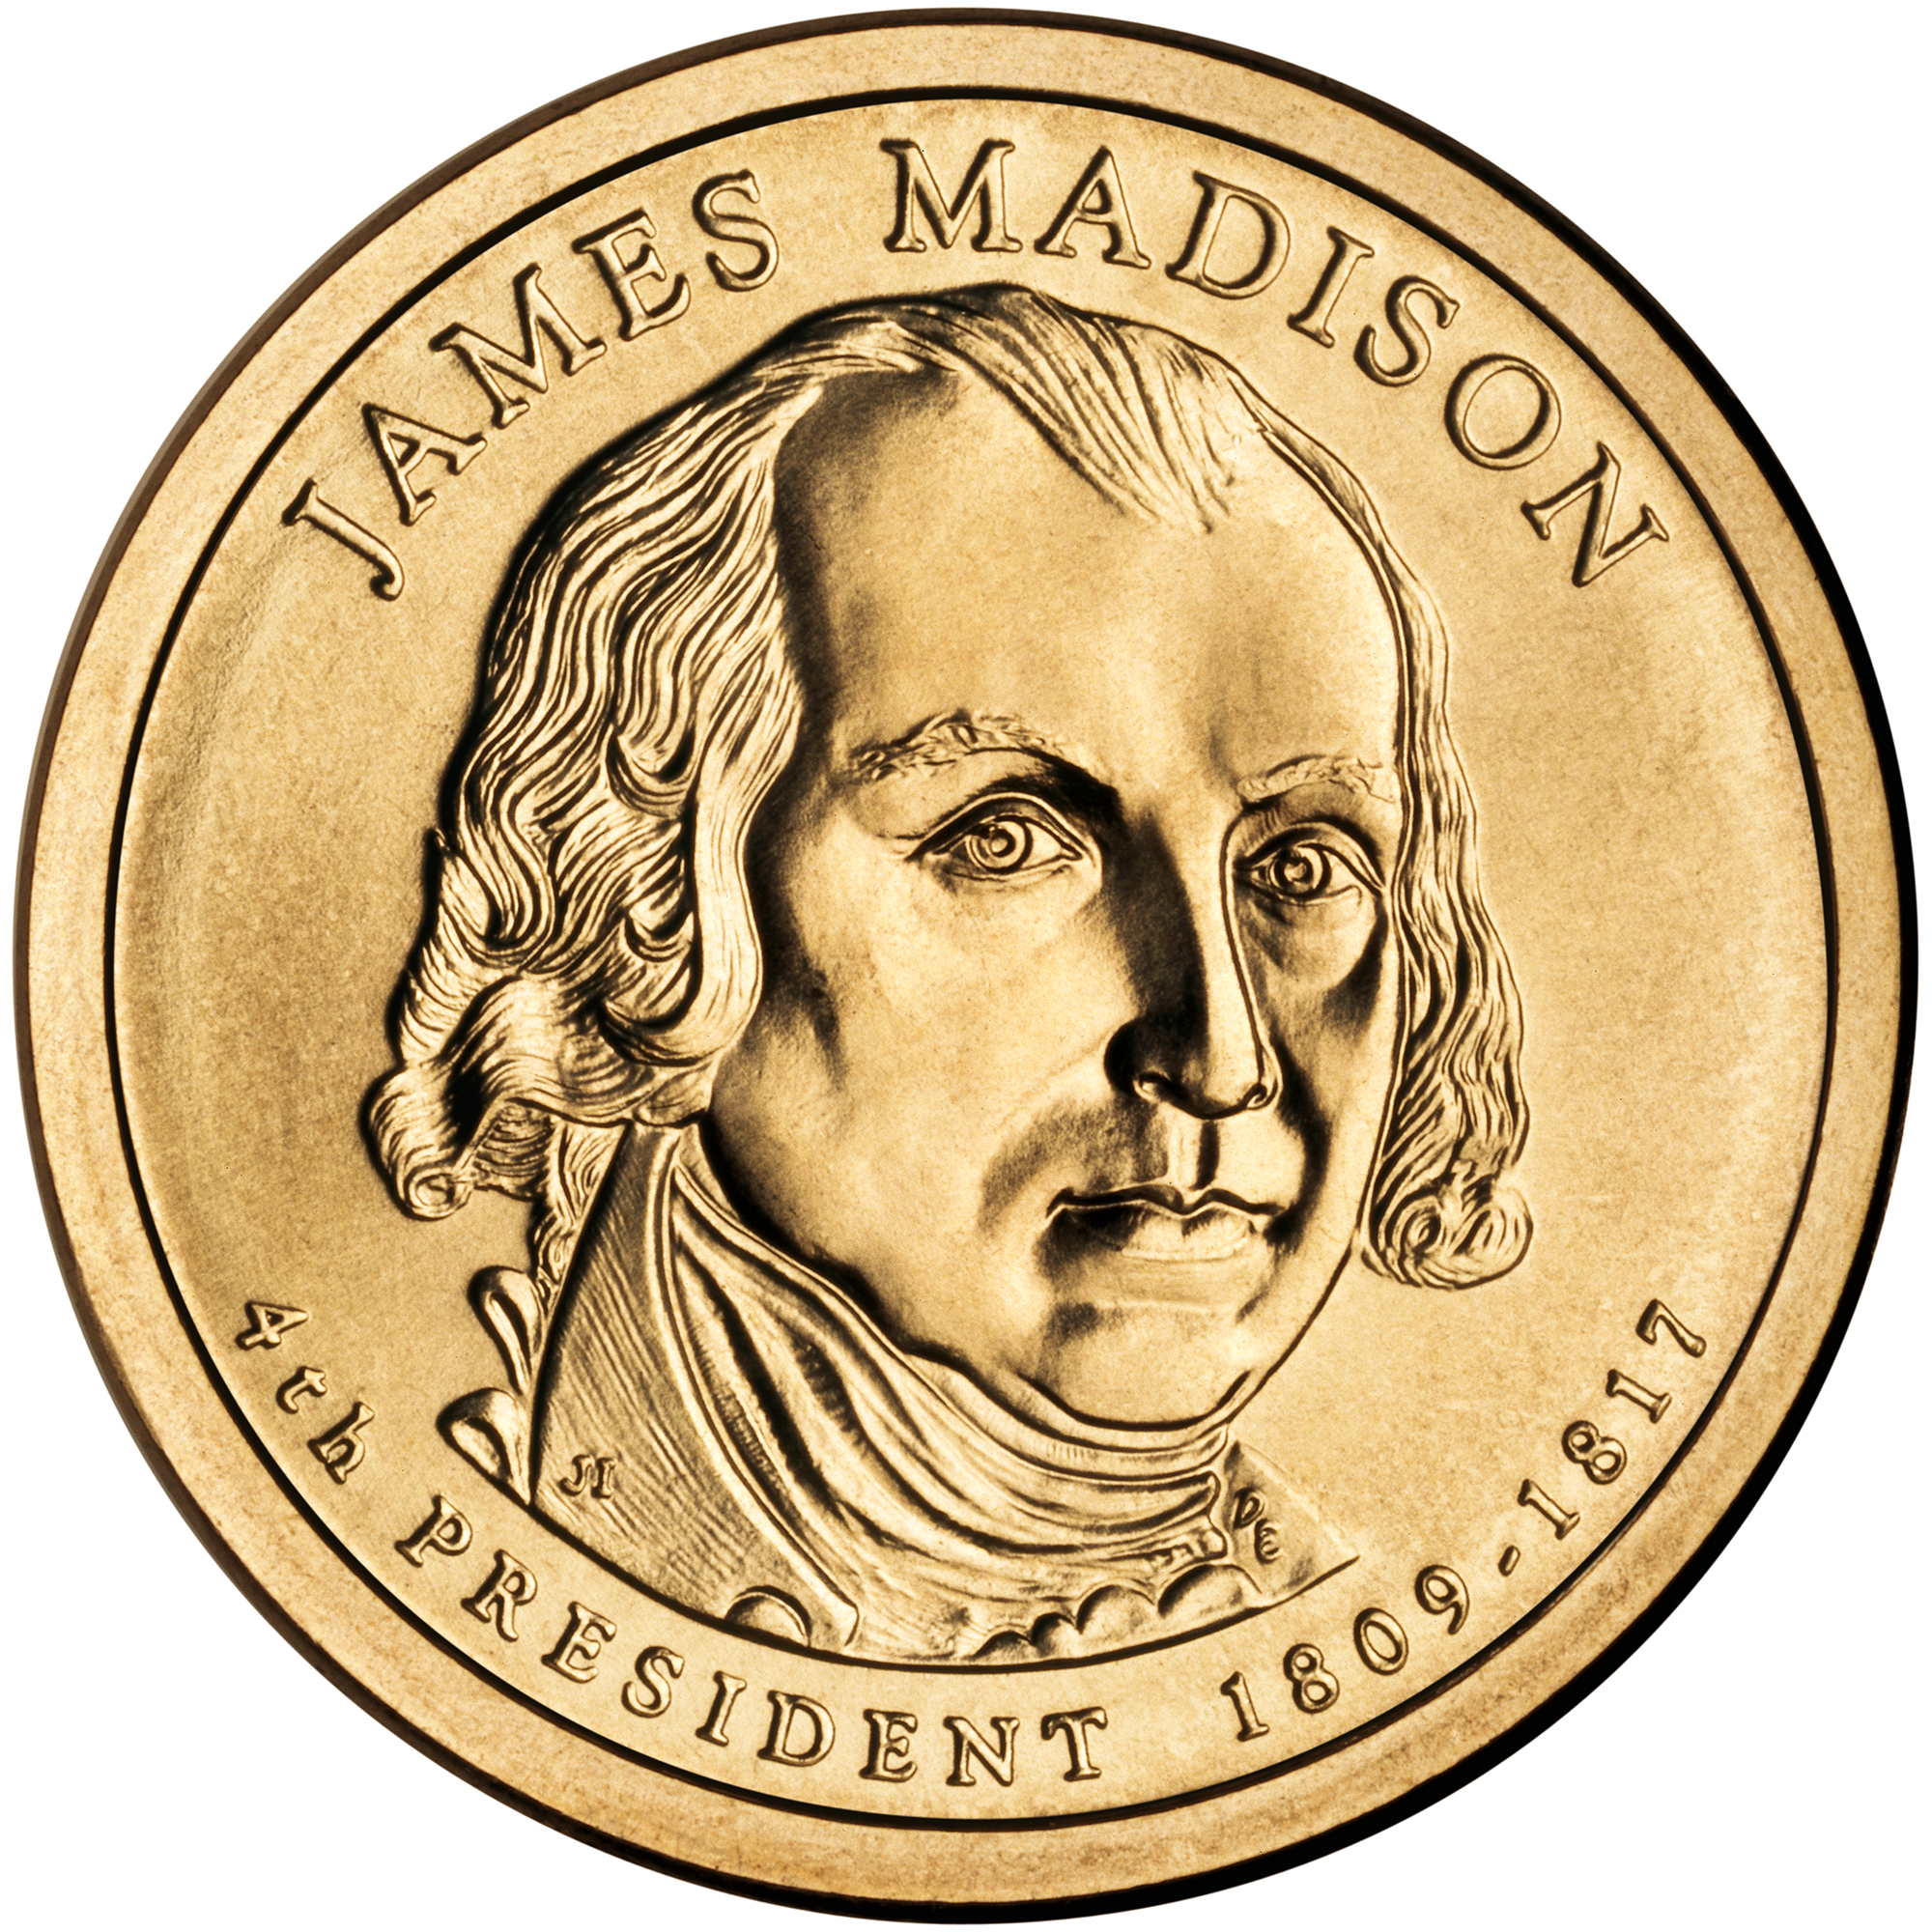 2007 Presidential Dollar Coin James Madison Uncirculated Obverse